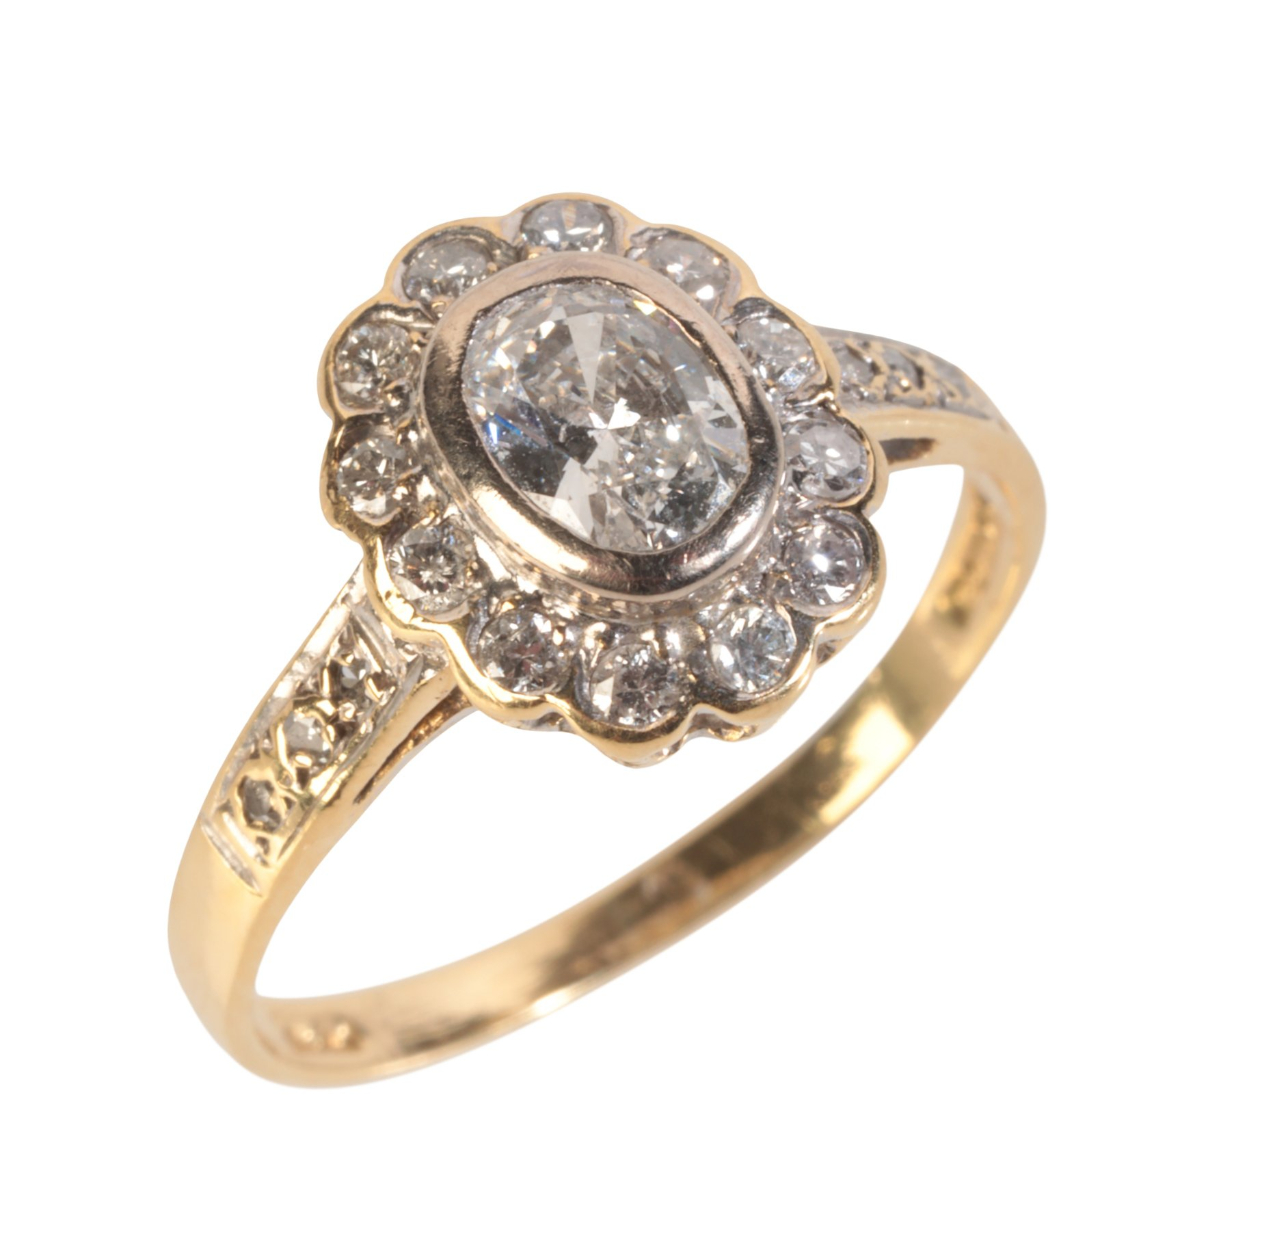 AN OVAL CUT DIAMOND CLUSTER RING